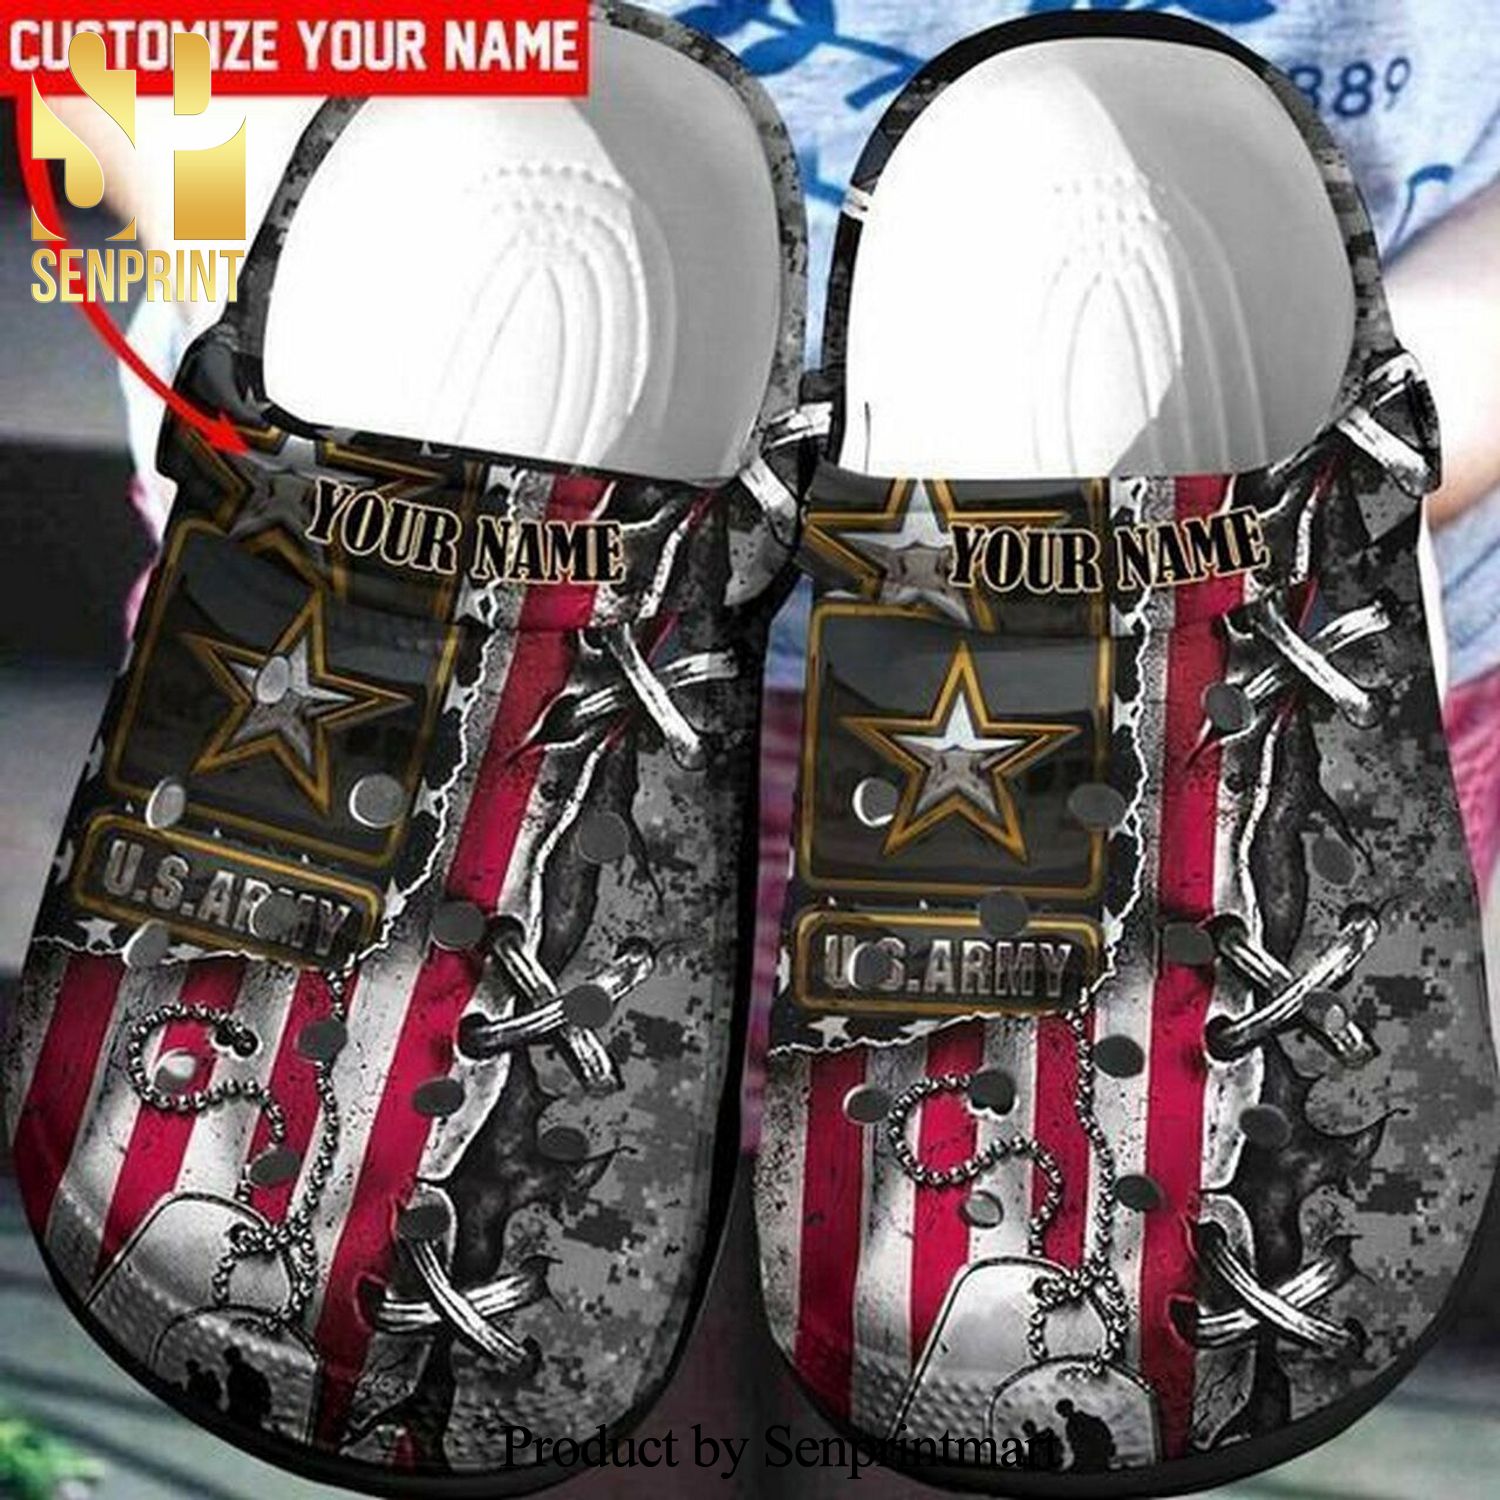 Top Us Army Custom Name Gift For Lover All Over Printed Classic Crocs Crocband Clog